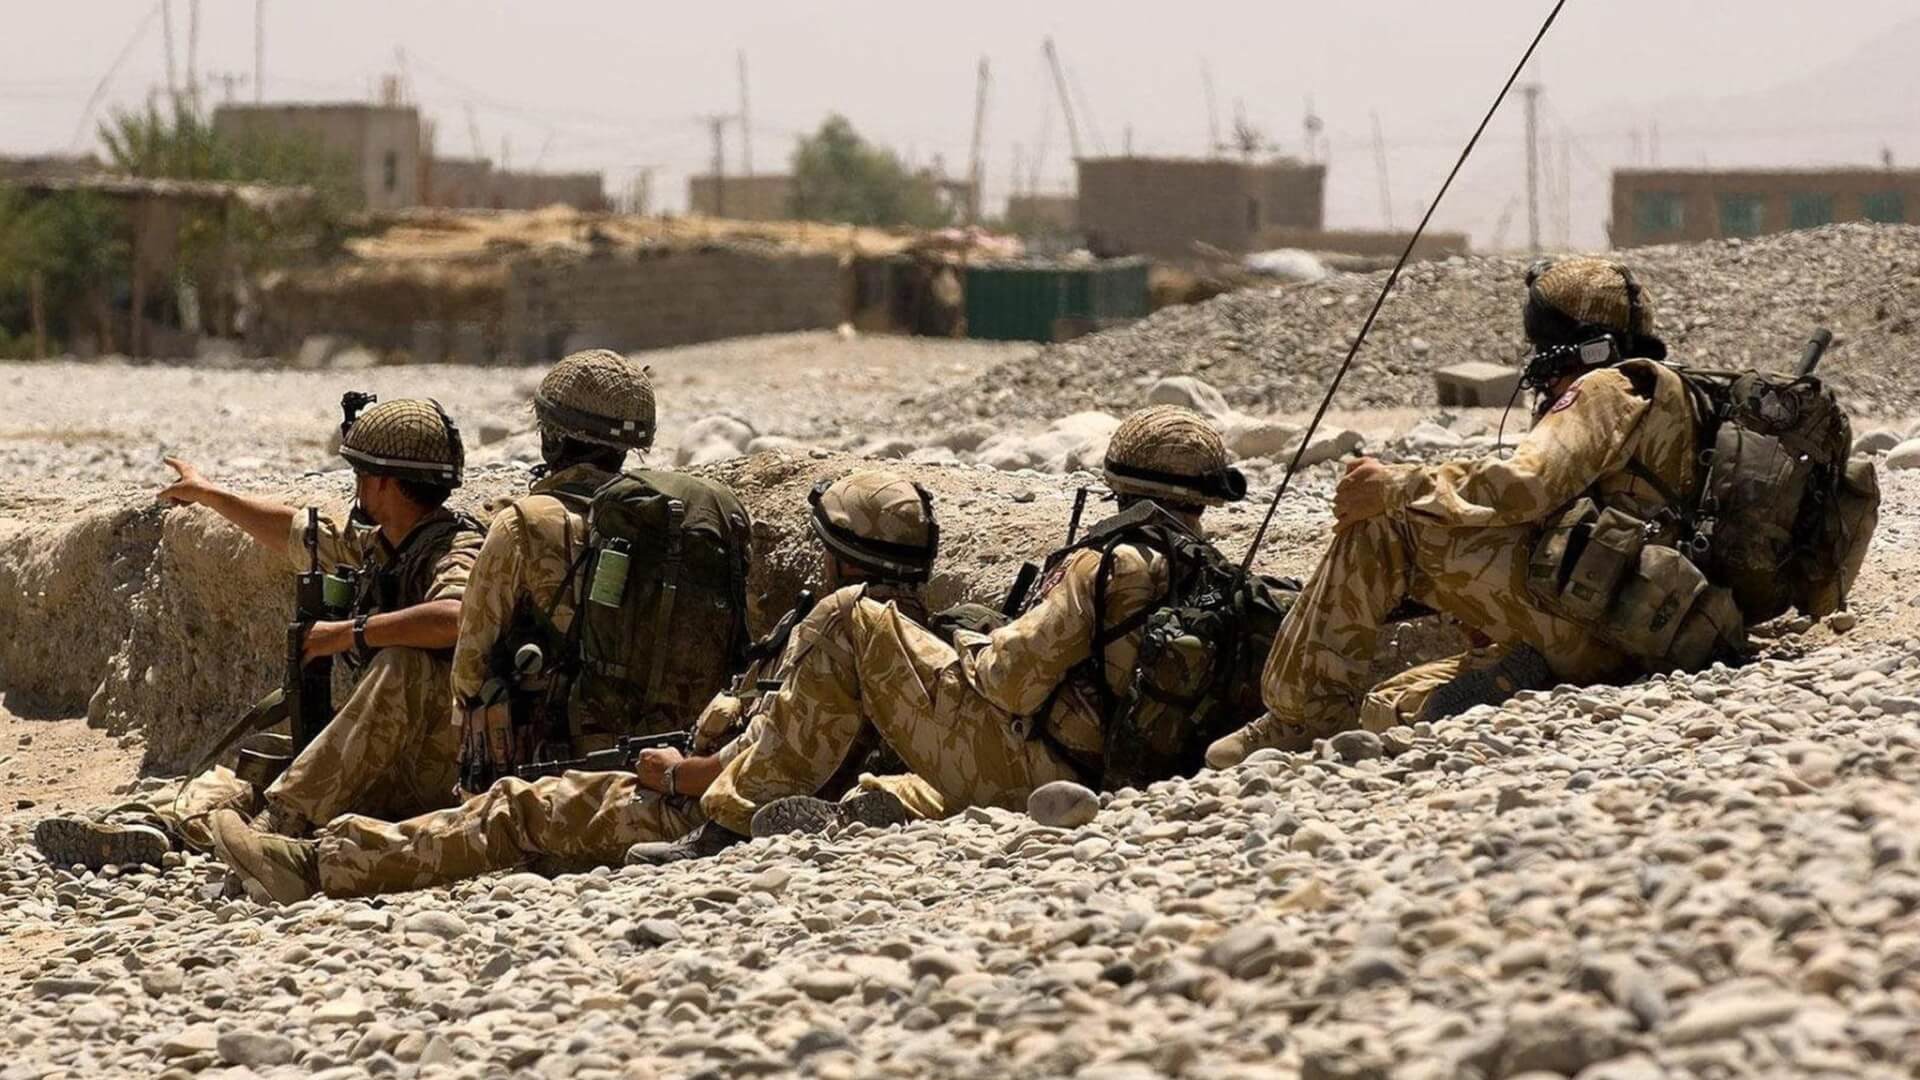 British Special Forces Had Kill Count Competitions in Afghanistan, Says New Report